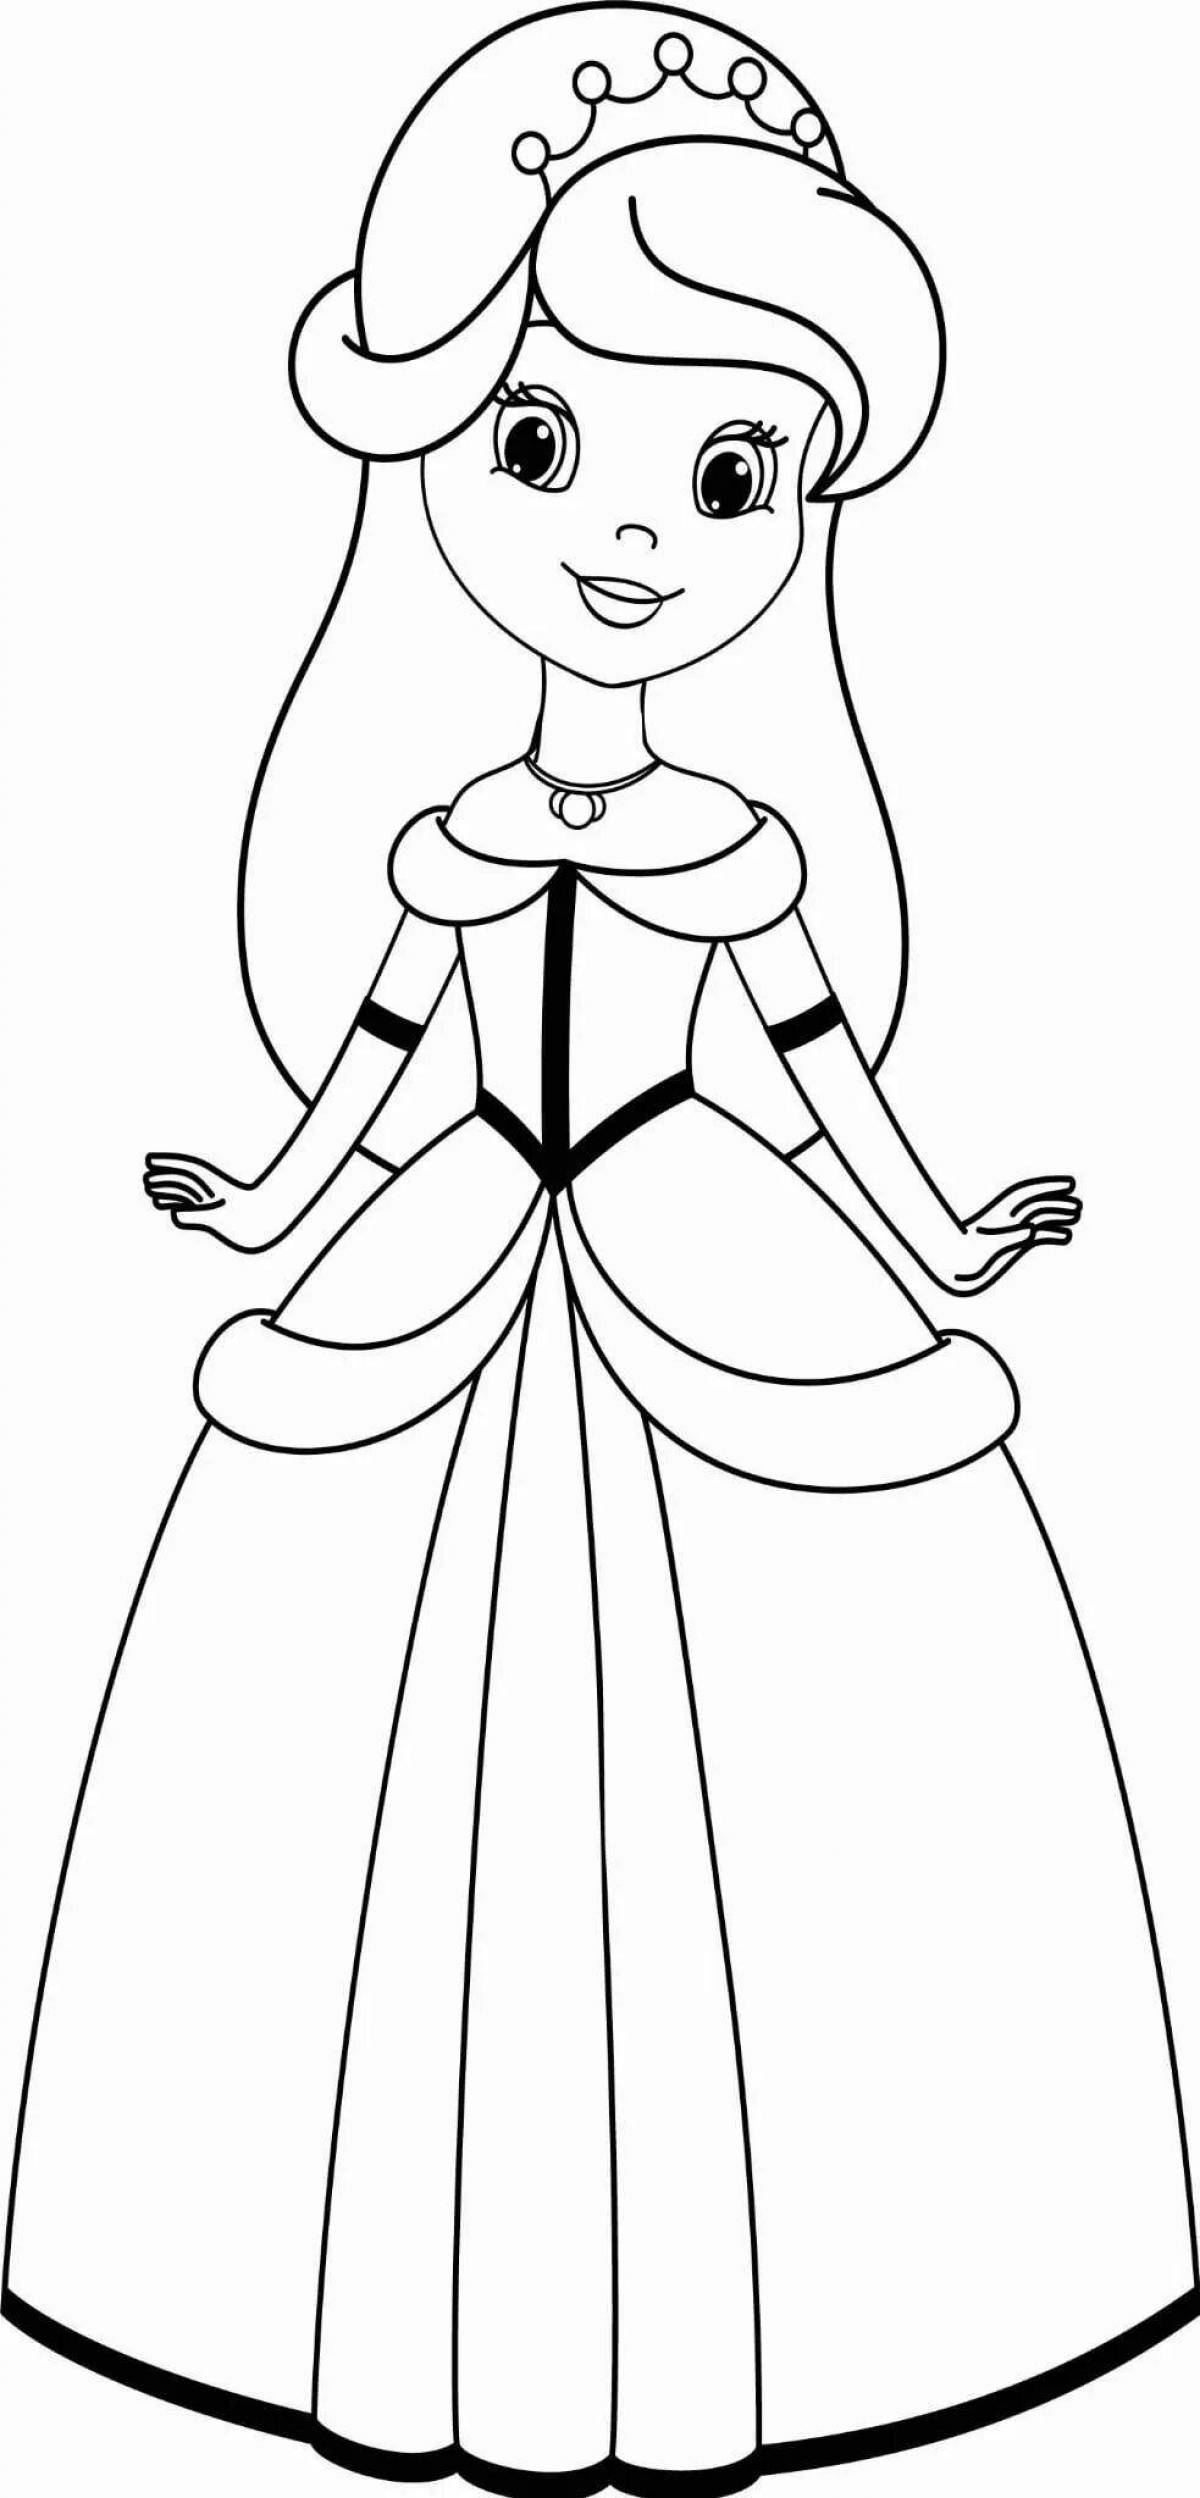 Exotic princess coloring pages for girls 4 years old